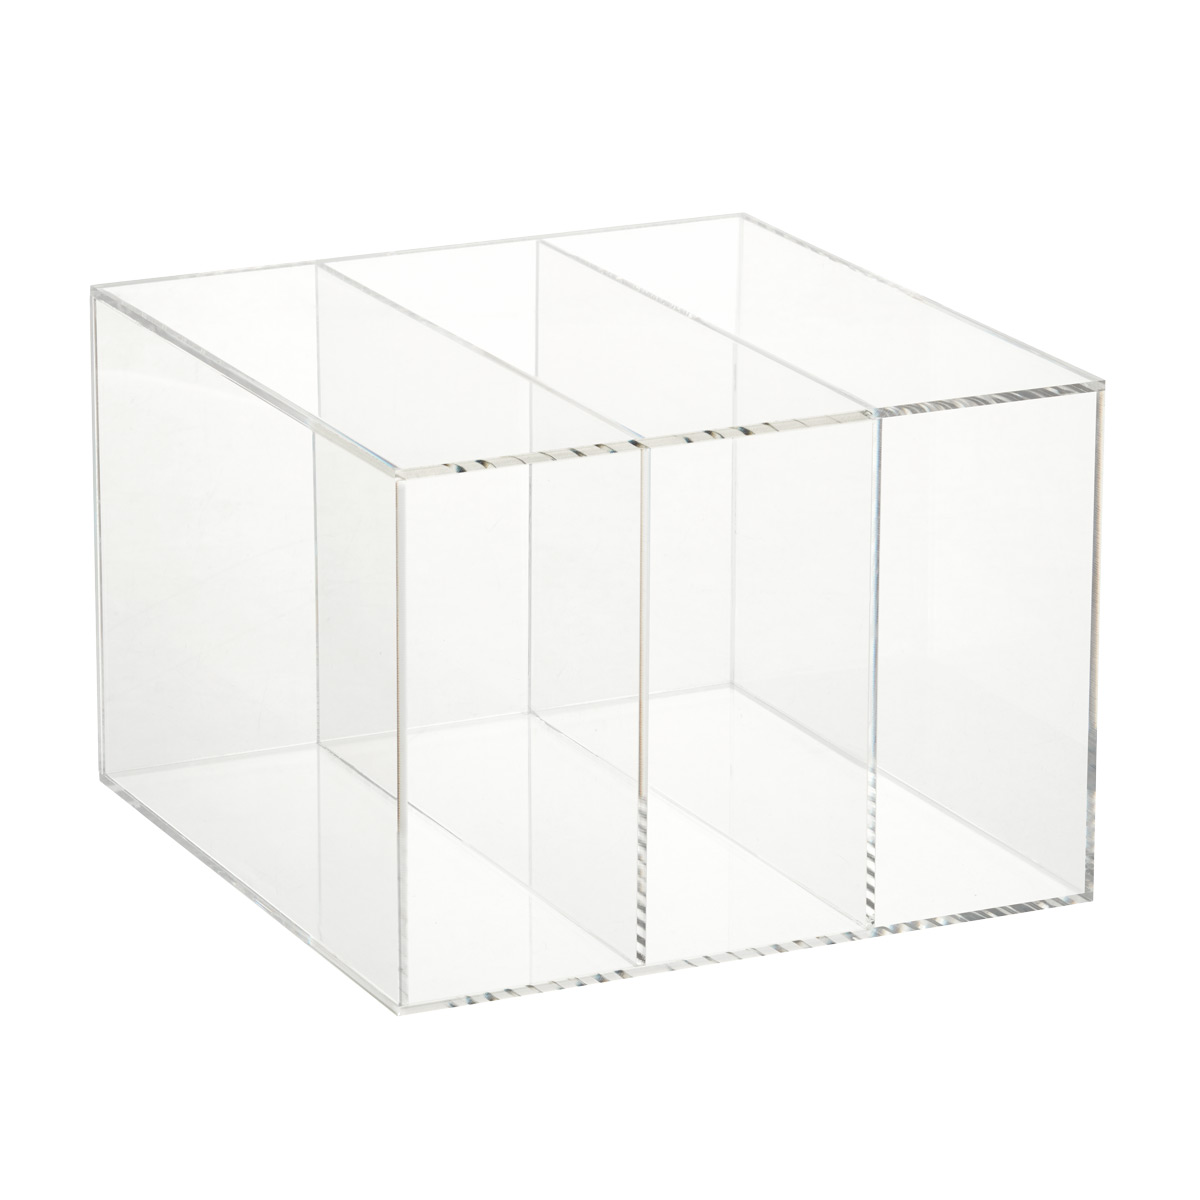 https://www.containerstore.com/catalogimages/310047/10071447-acrylic-clutch-organizer-v2.jpg